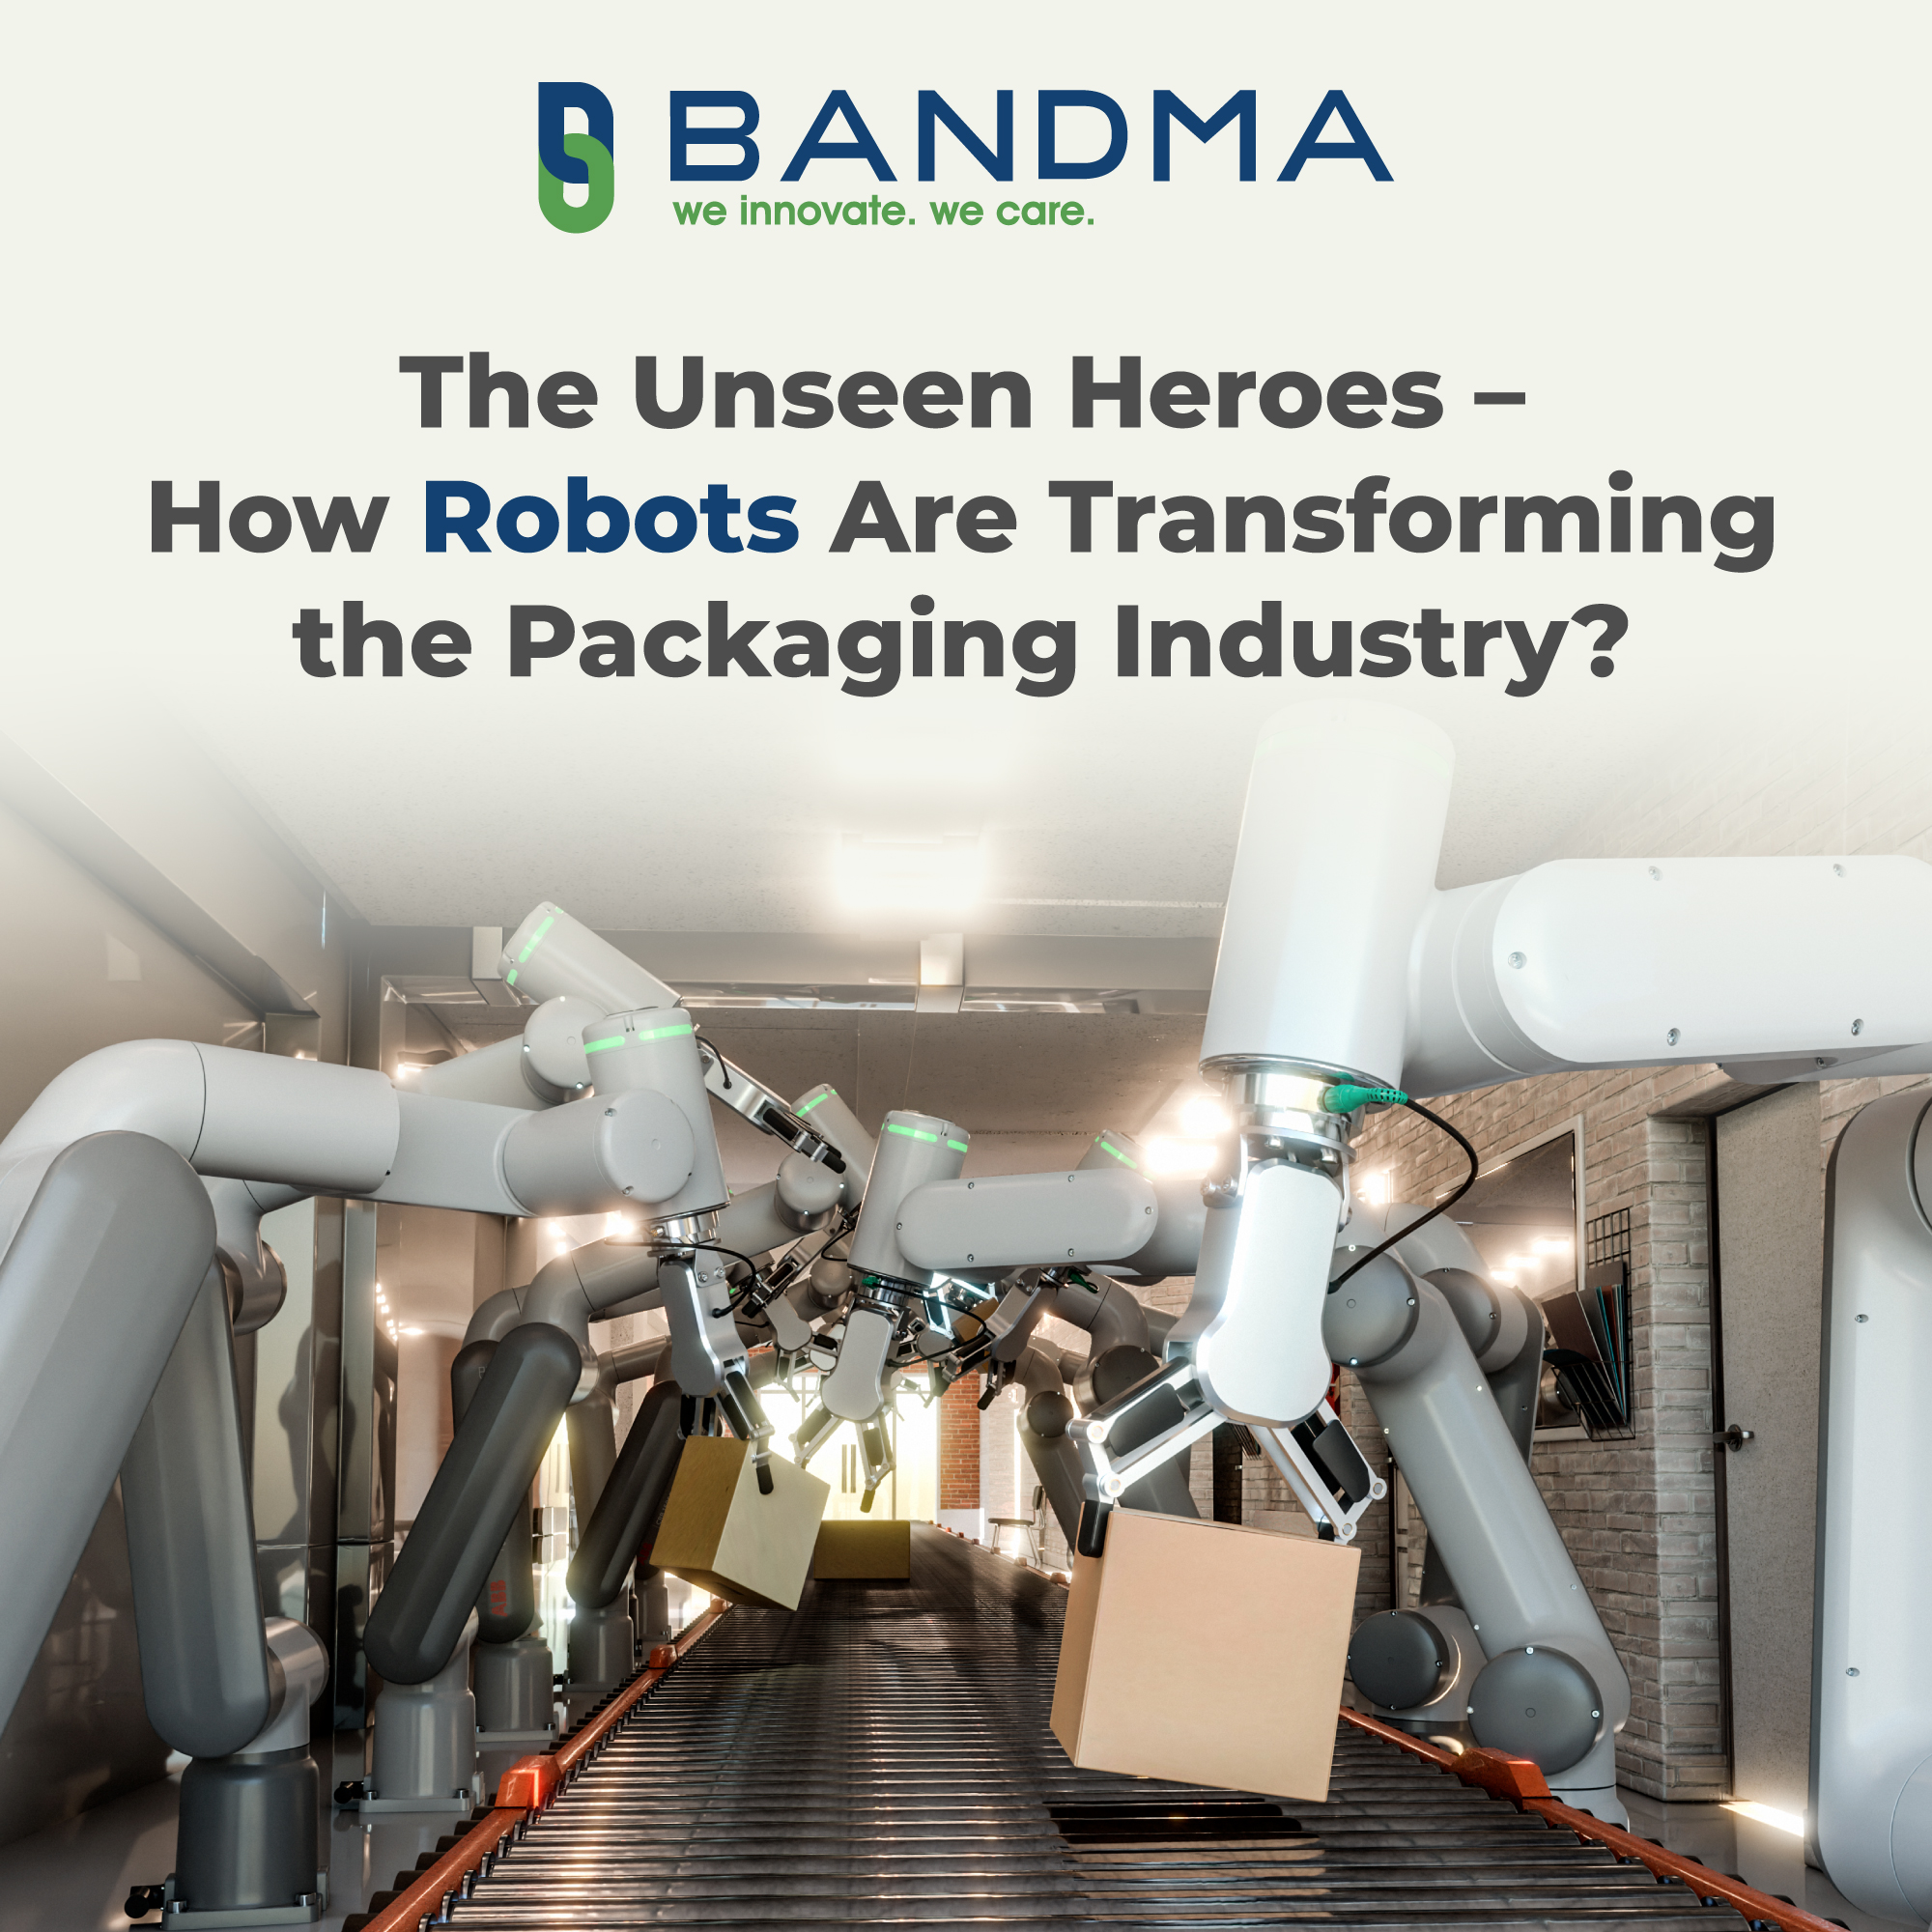 The Unseen Heroes – How Robots Are Transforming the Packaging Industry?